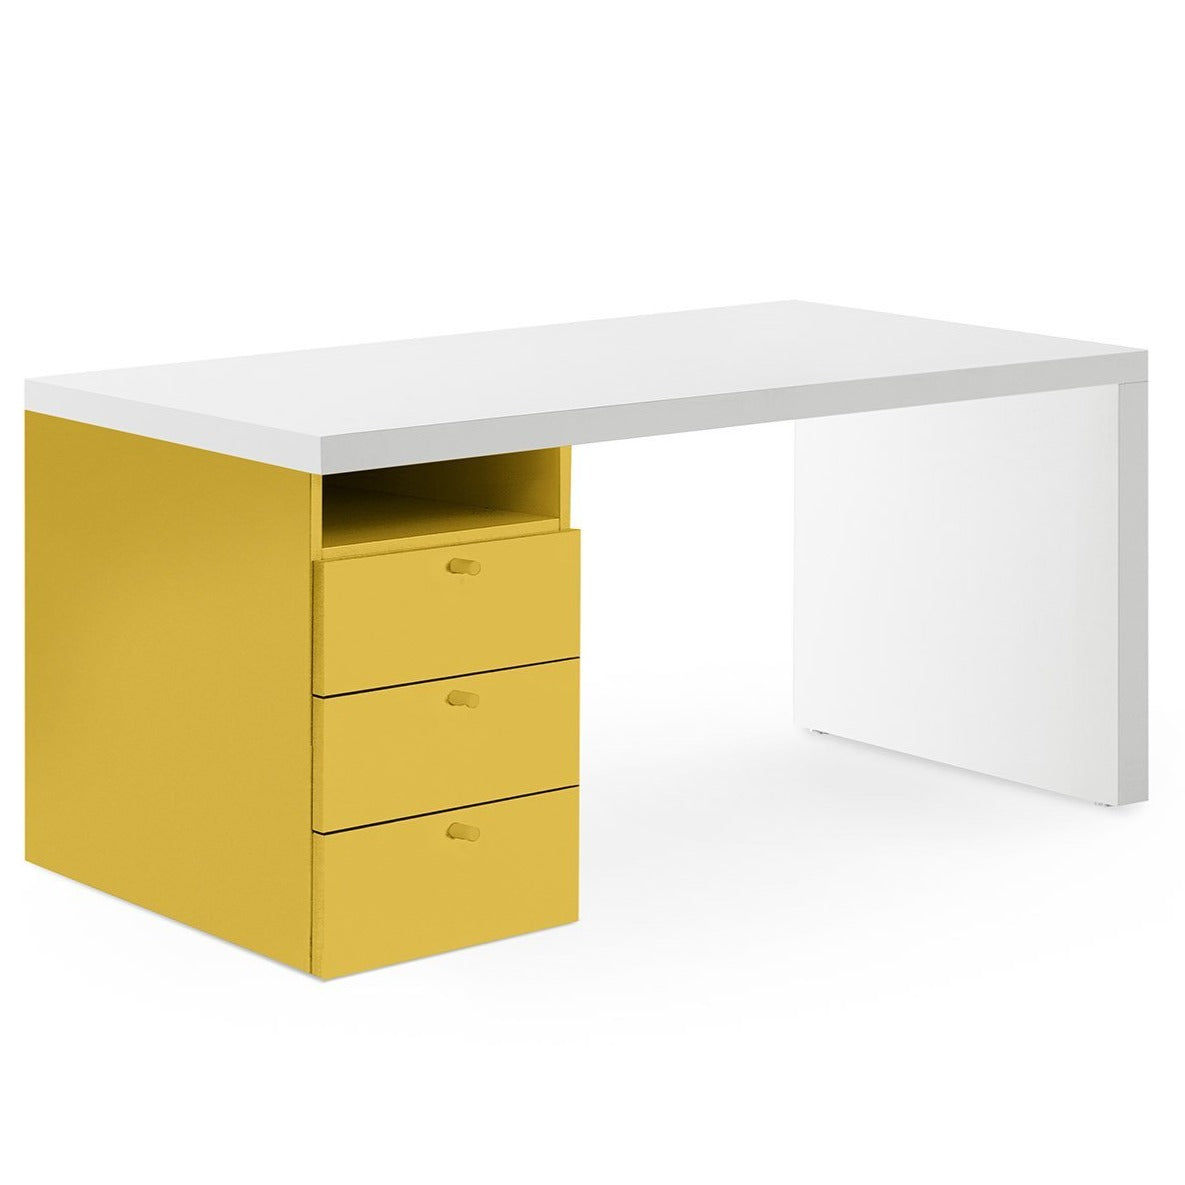 Children’s Study Desk by Nidi – Choice of Colours and Sizes